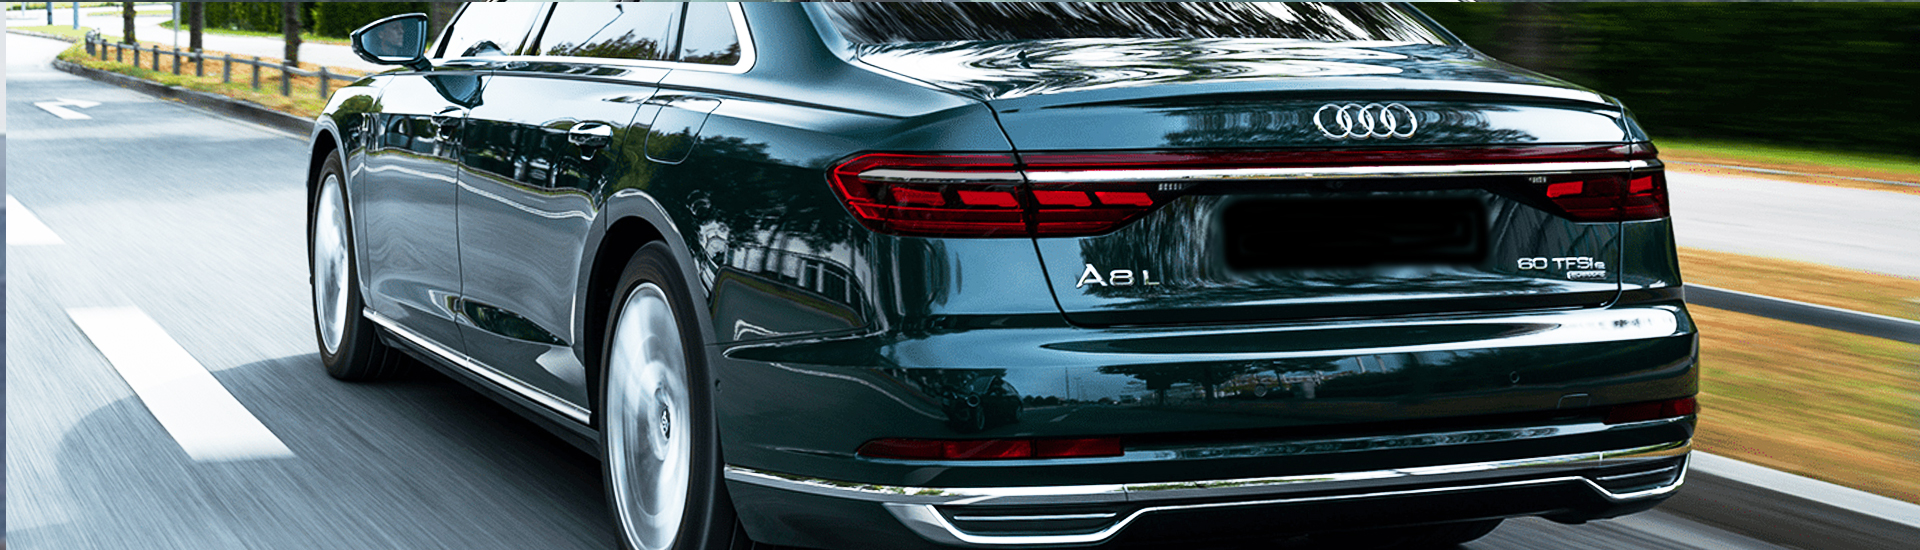 Audi A8 Tail Light Tint Covers